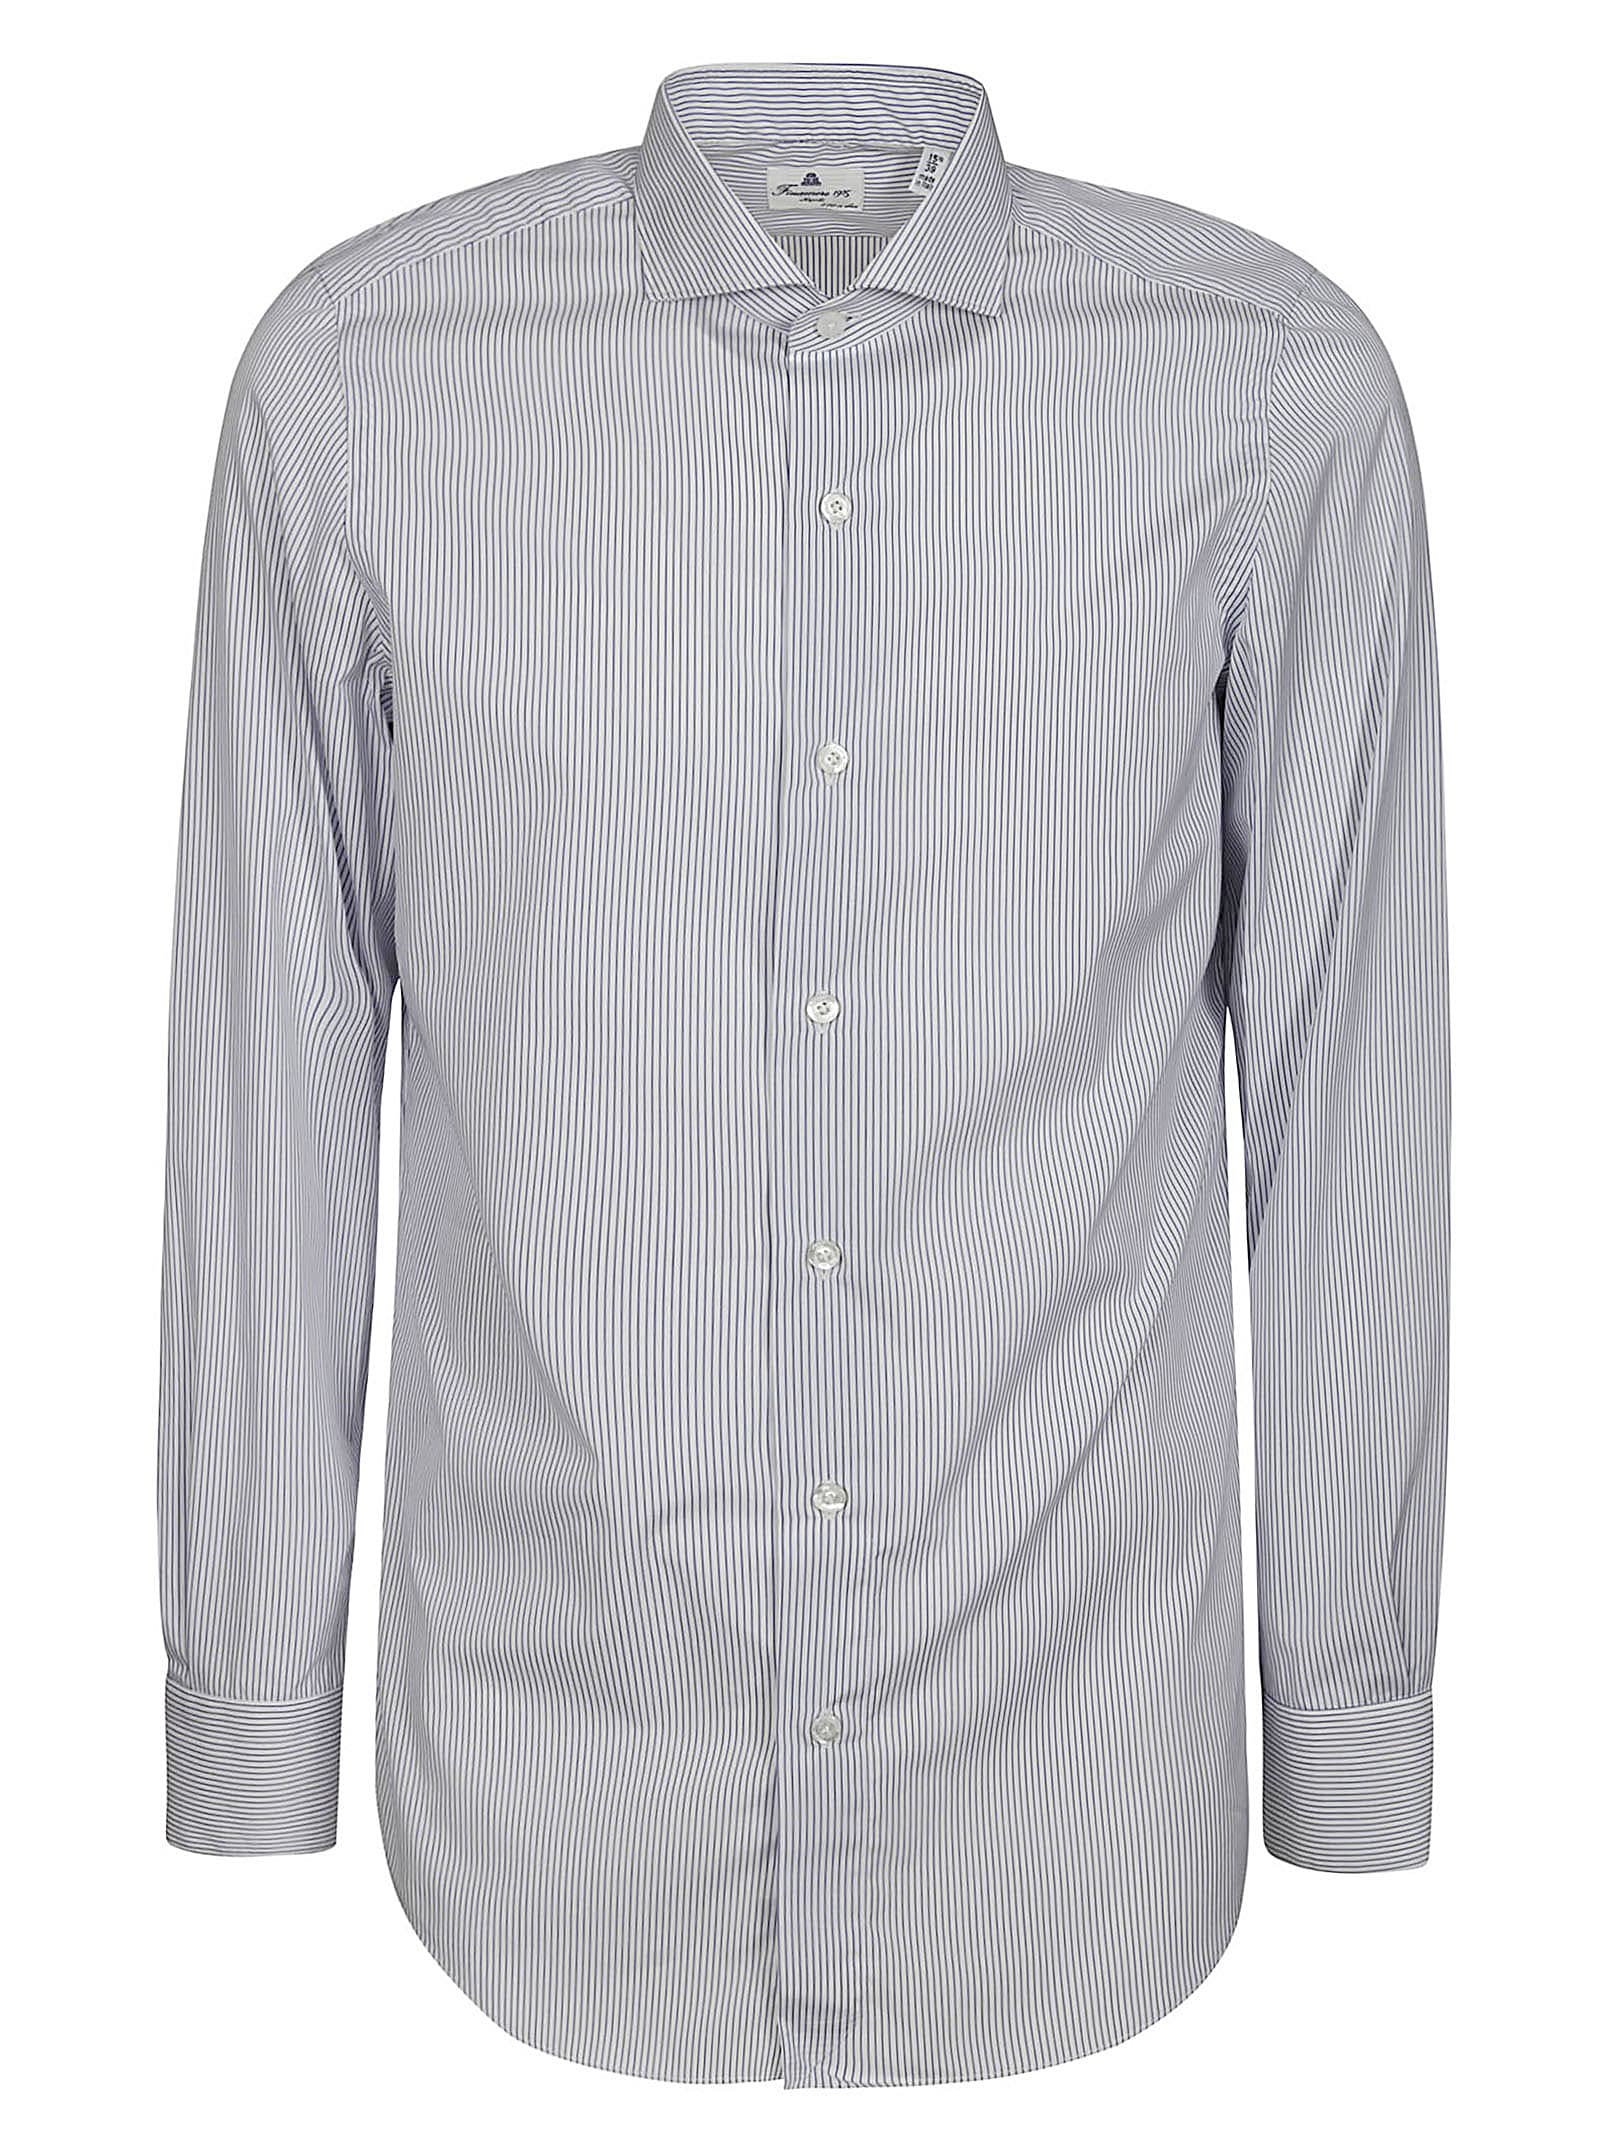 Finamore Shirt 170.2 In Stripes